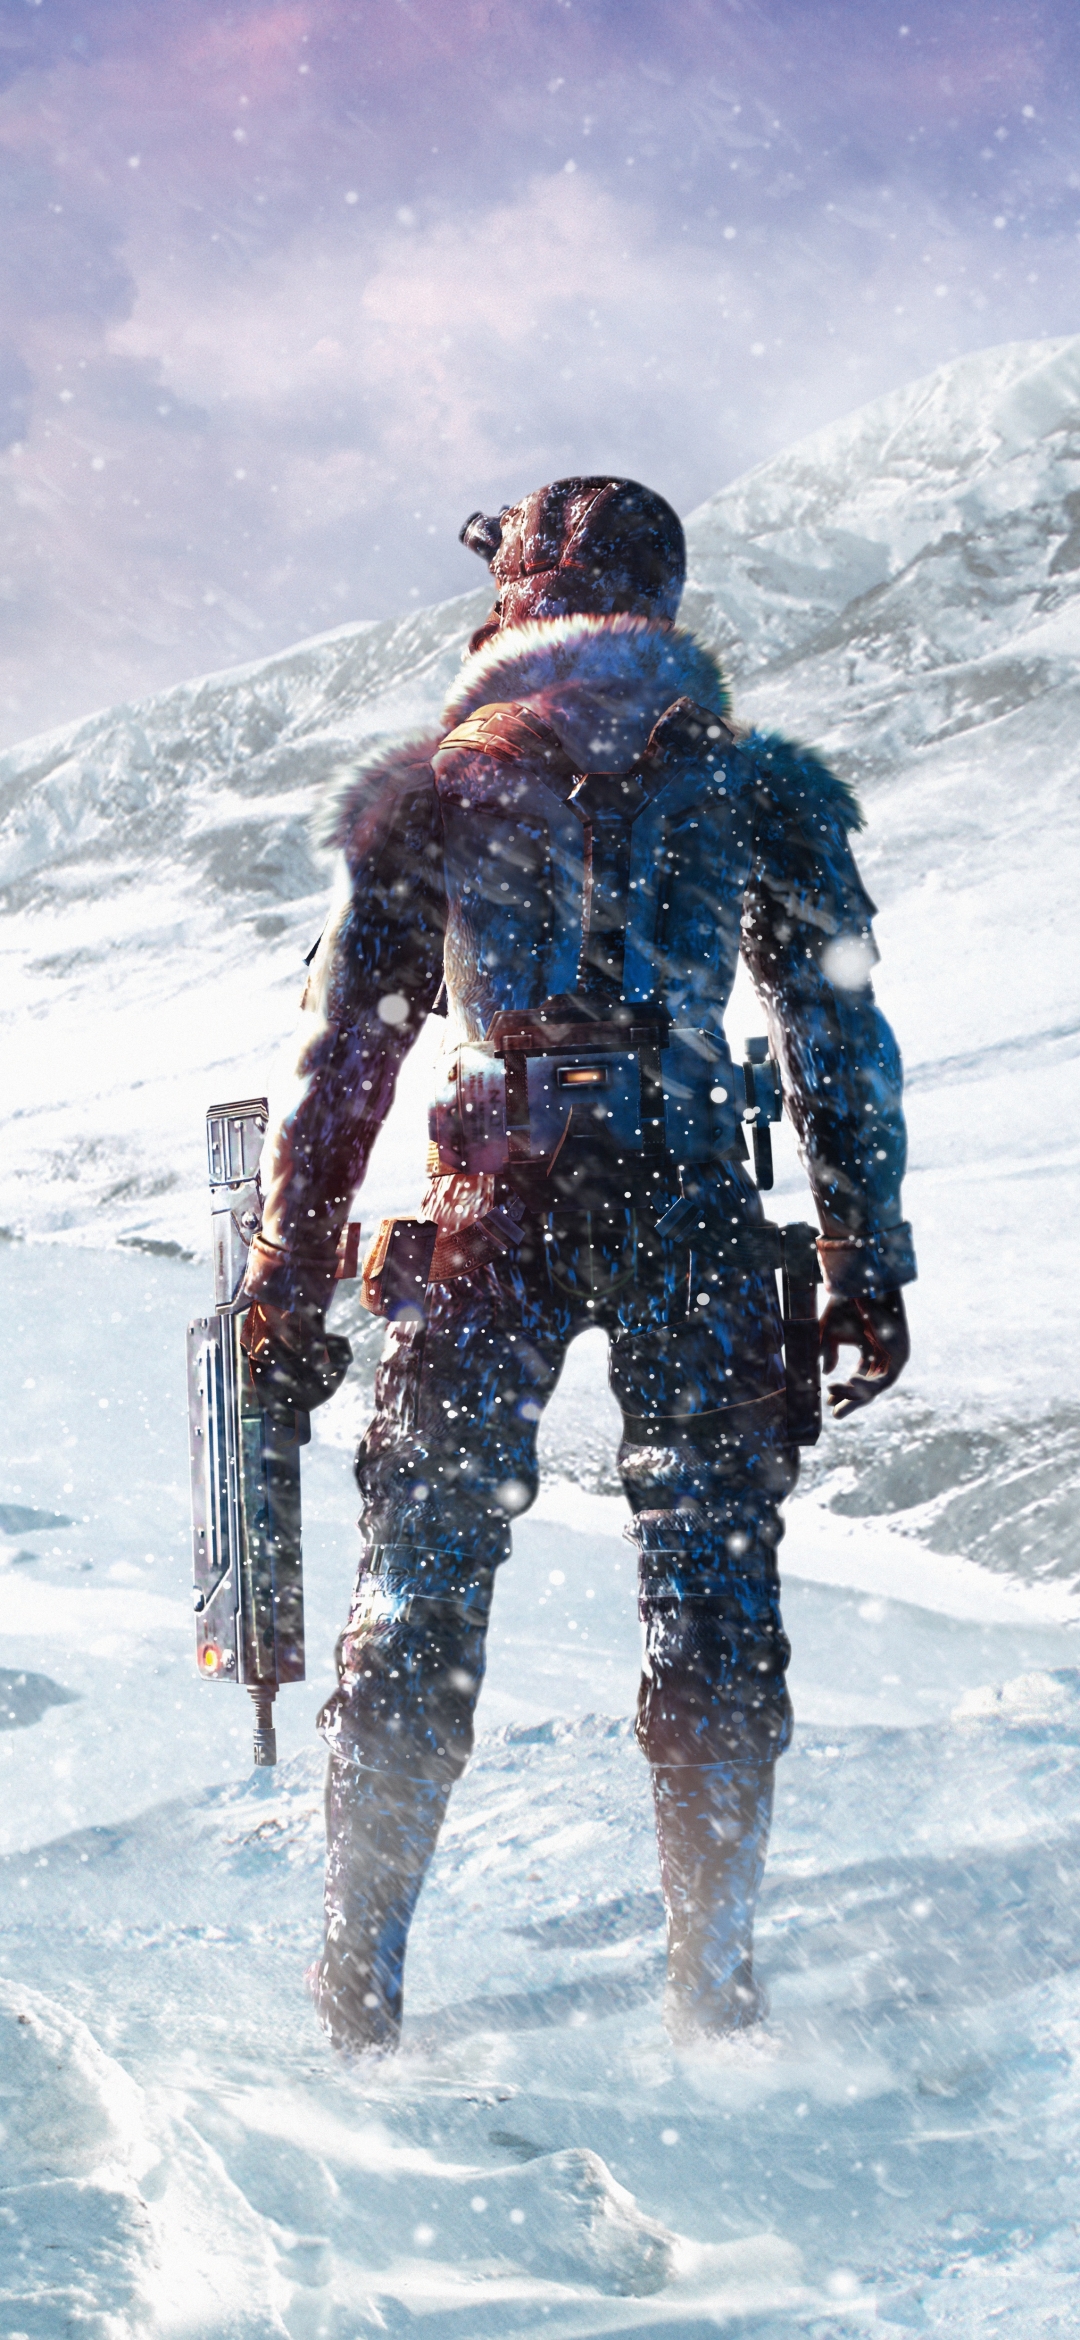 video game, lost planet, weapon, snow, snowfall, soldier